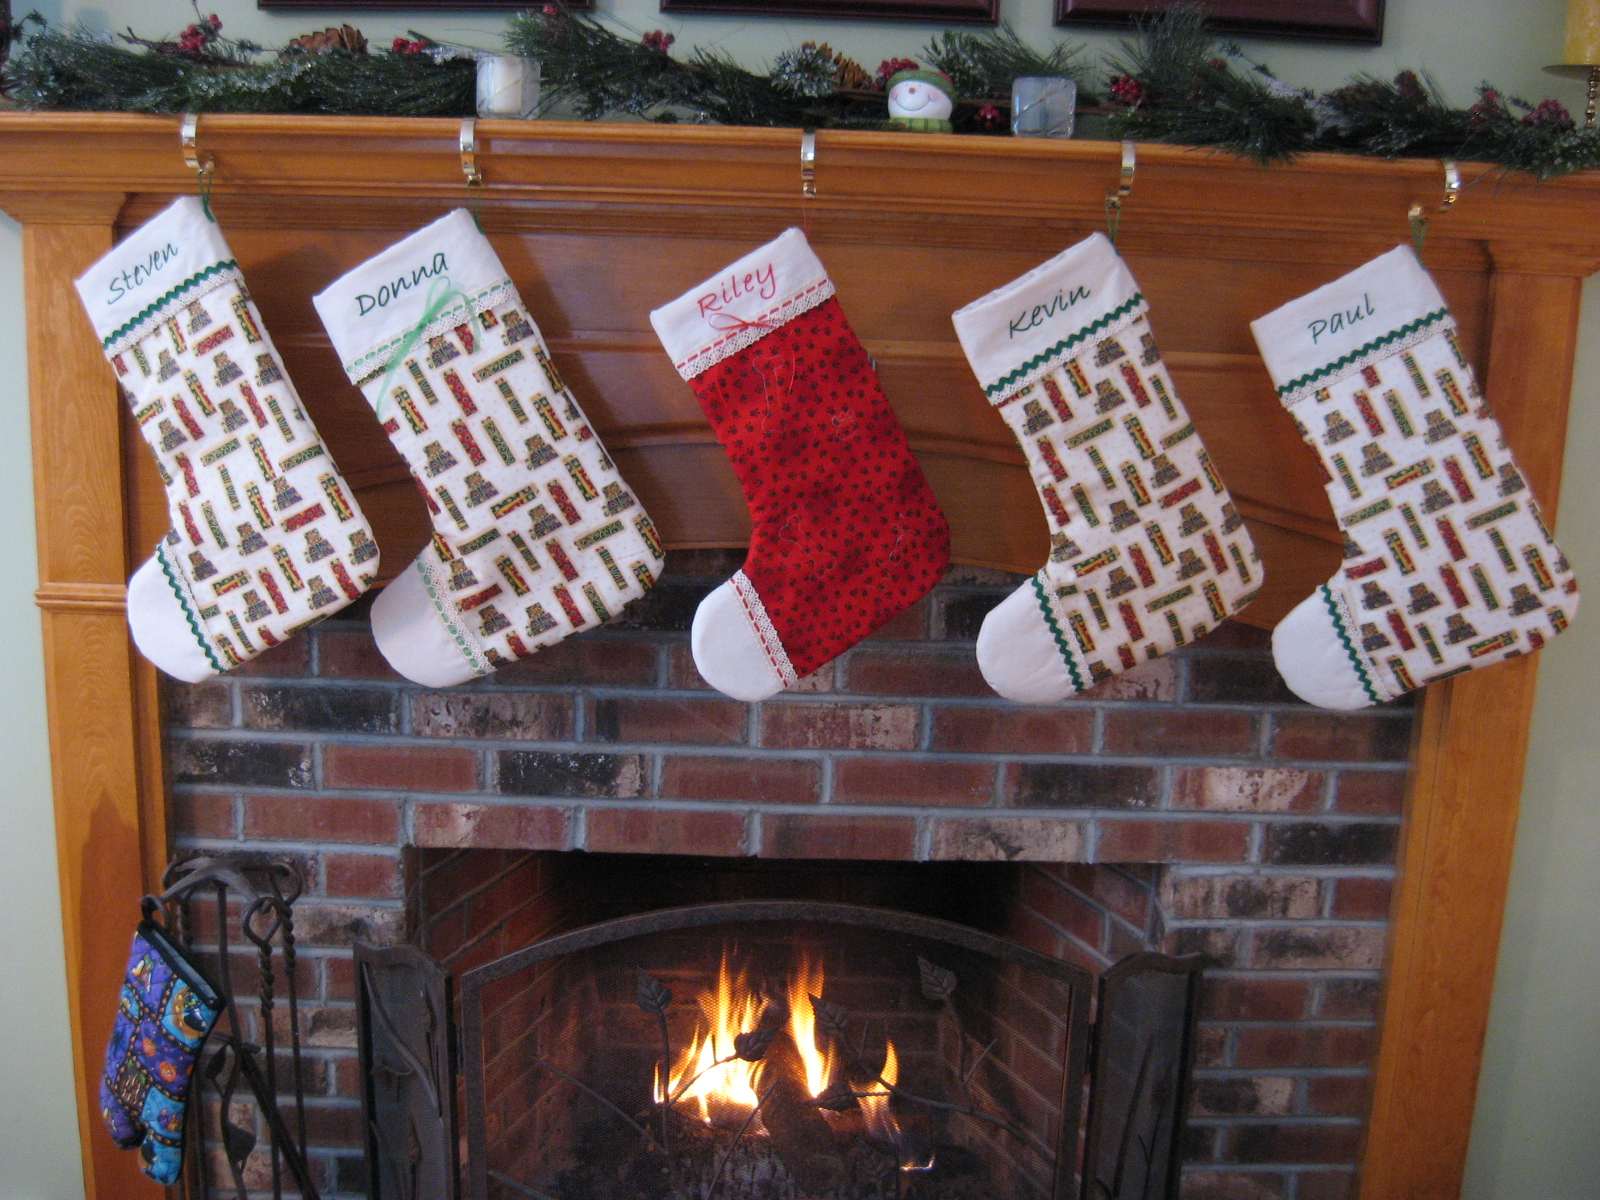 Best Christmas Stockings On Fireplace Ideas in 2022